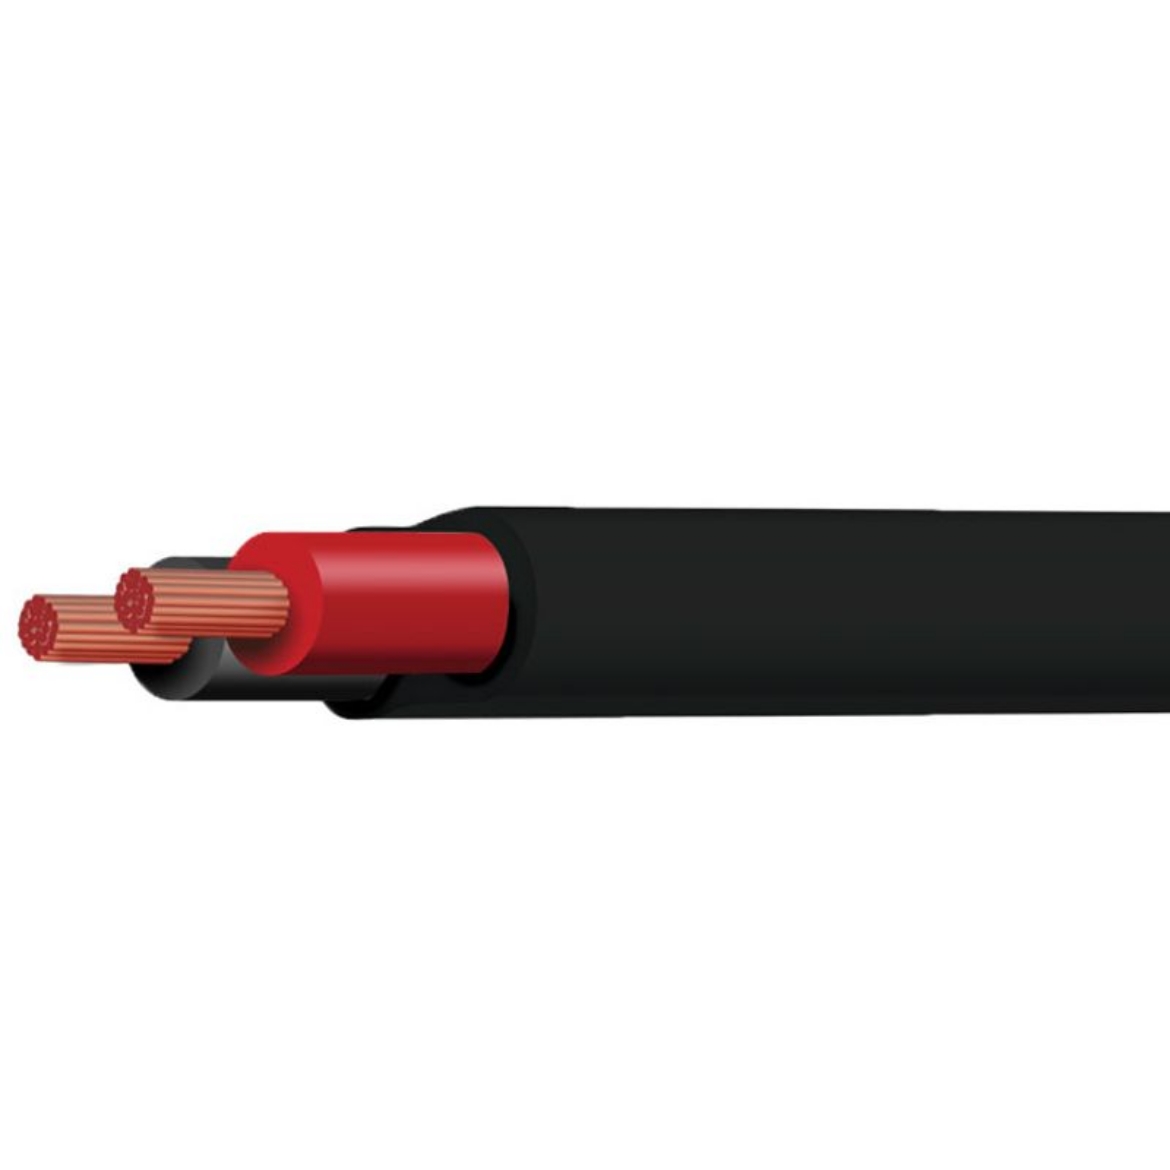 Picture of TYCAB 3MM TWIN CORE CABLE 16A TWIN SHEATH BLACK/REDL